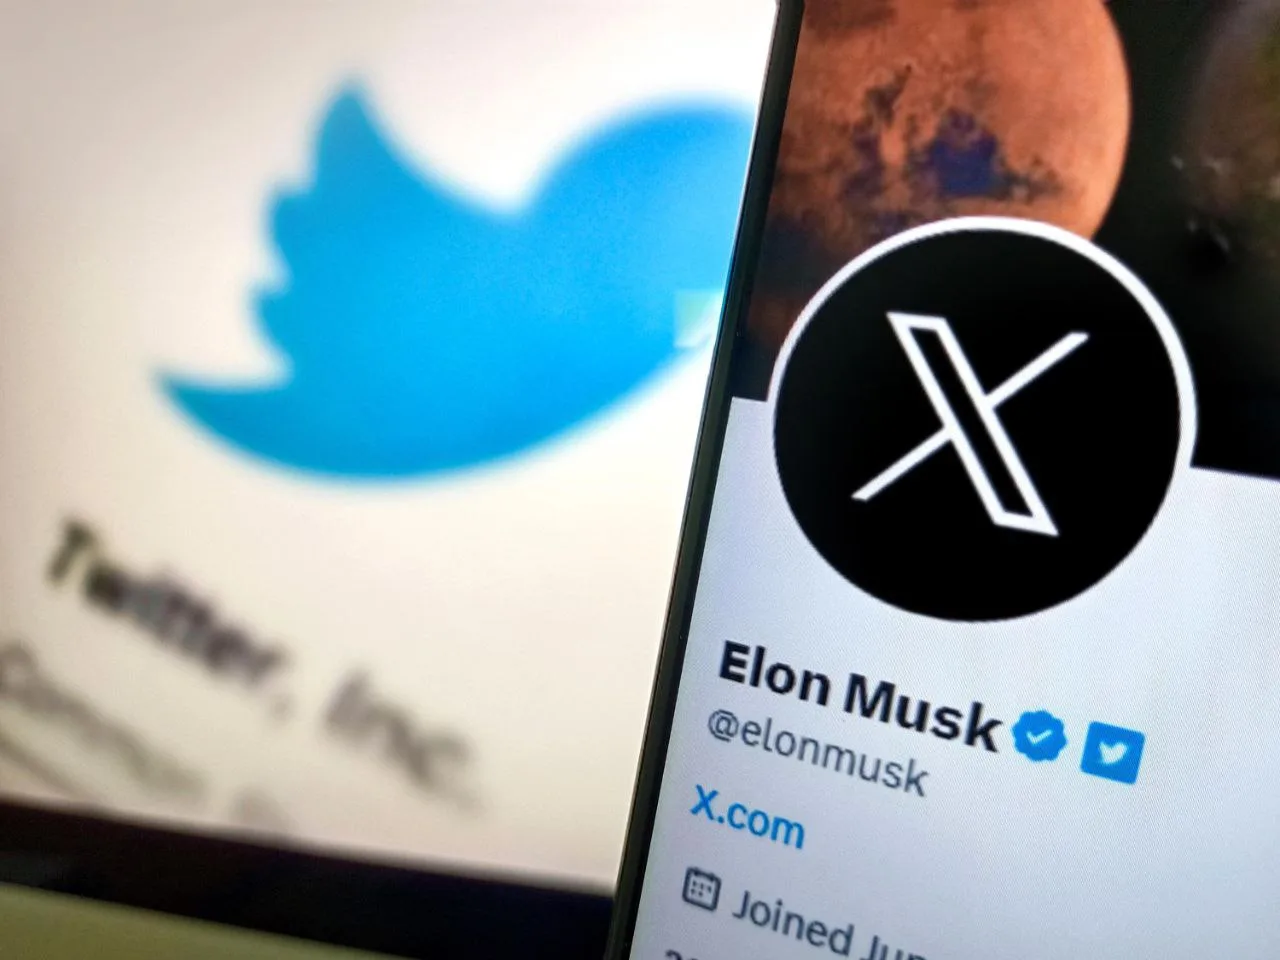 Introducing Twitter X: Elon Musk's Vision for the Future of Social Media